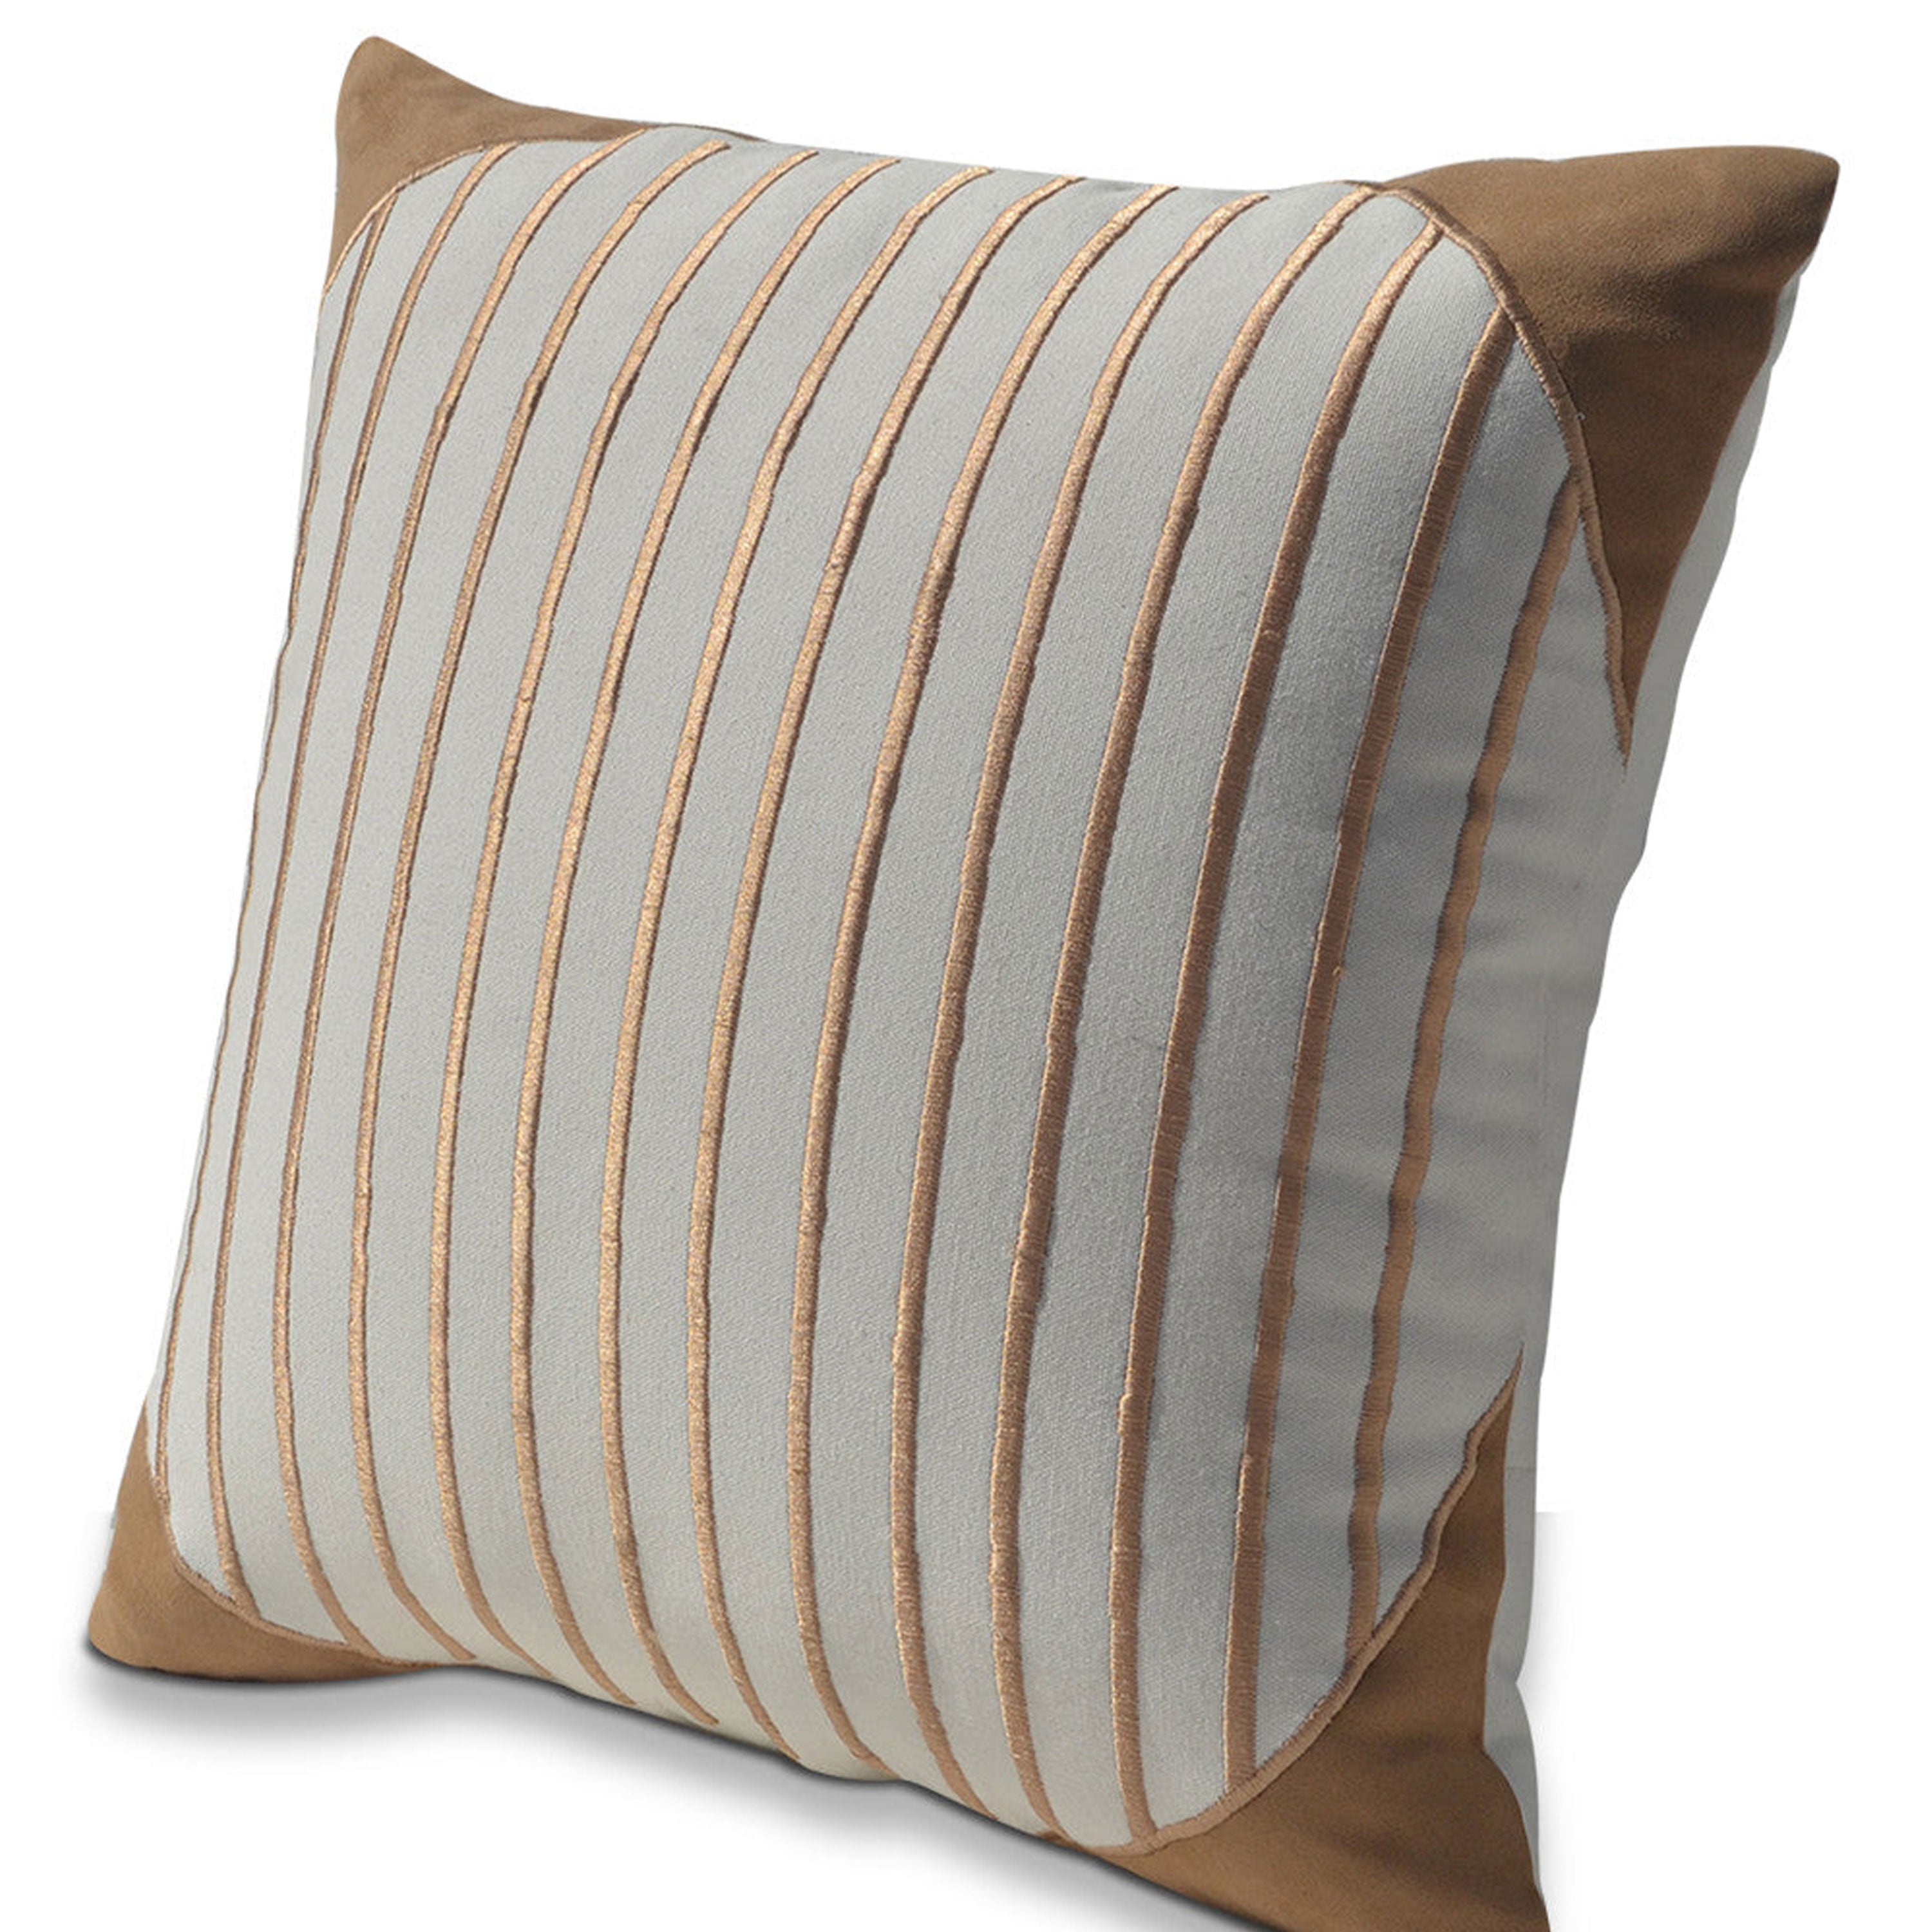 Geometric Stripes Hand Embroidered Decorative Cotton Pillow Cover